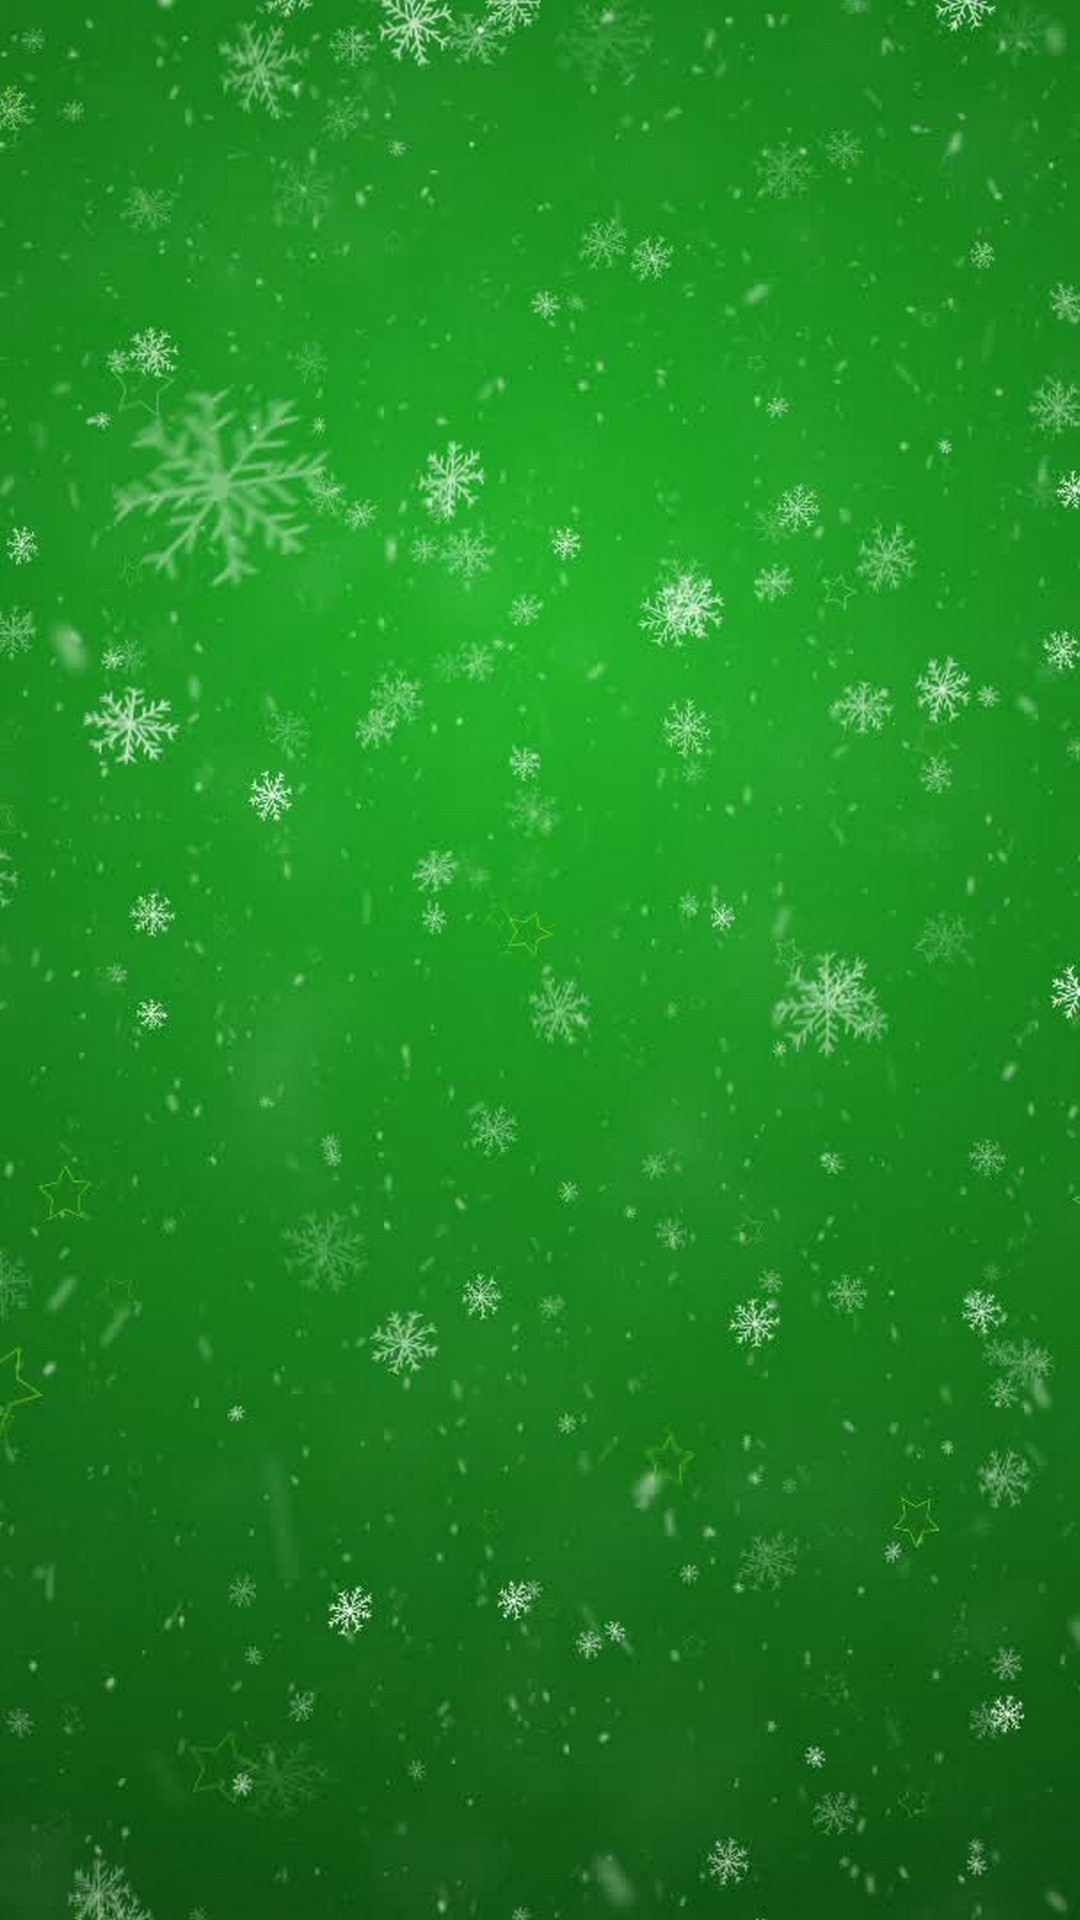 iPhone X Wallpaper Dark Green with image resolution 1080x1920 pixel. You can make this wallpaper for your iPhone 5, 6, 7, 8, X backgrounds, Mobile Screensaver, or iPad Lock Screen